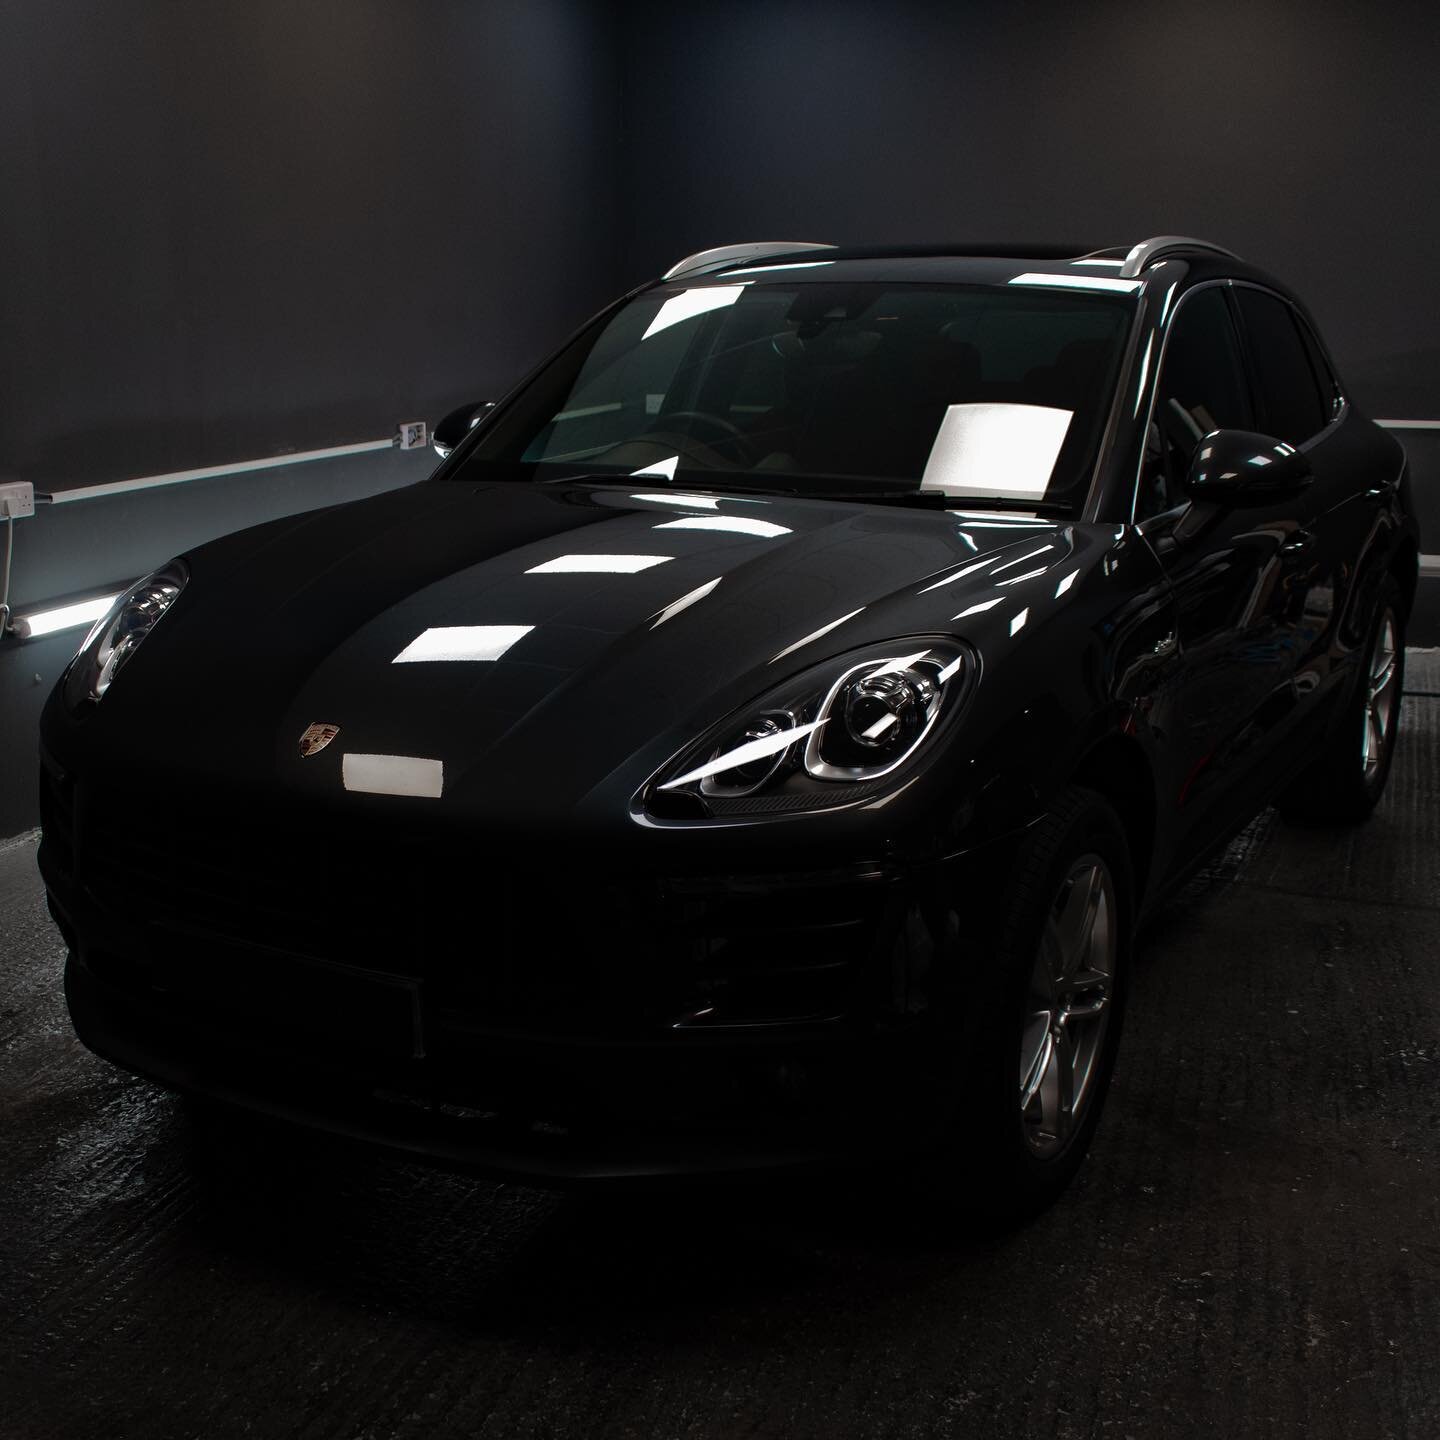 Single stage paint enhancement correction completed to this Porsche Macan in our dedicated detailing studio